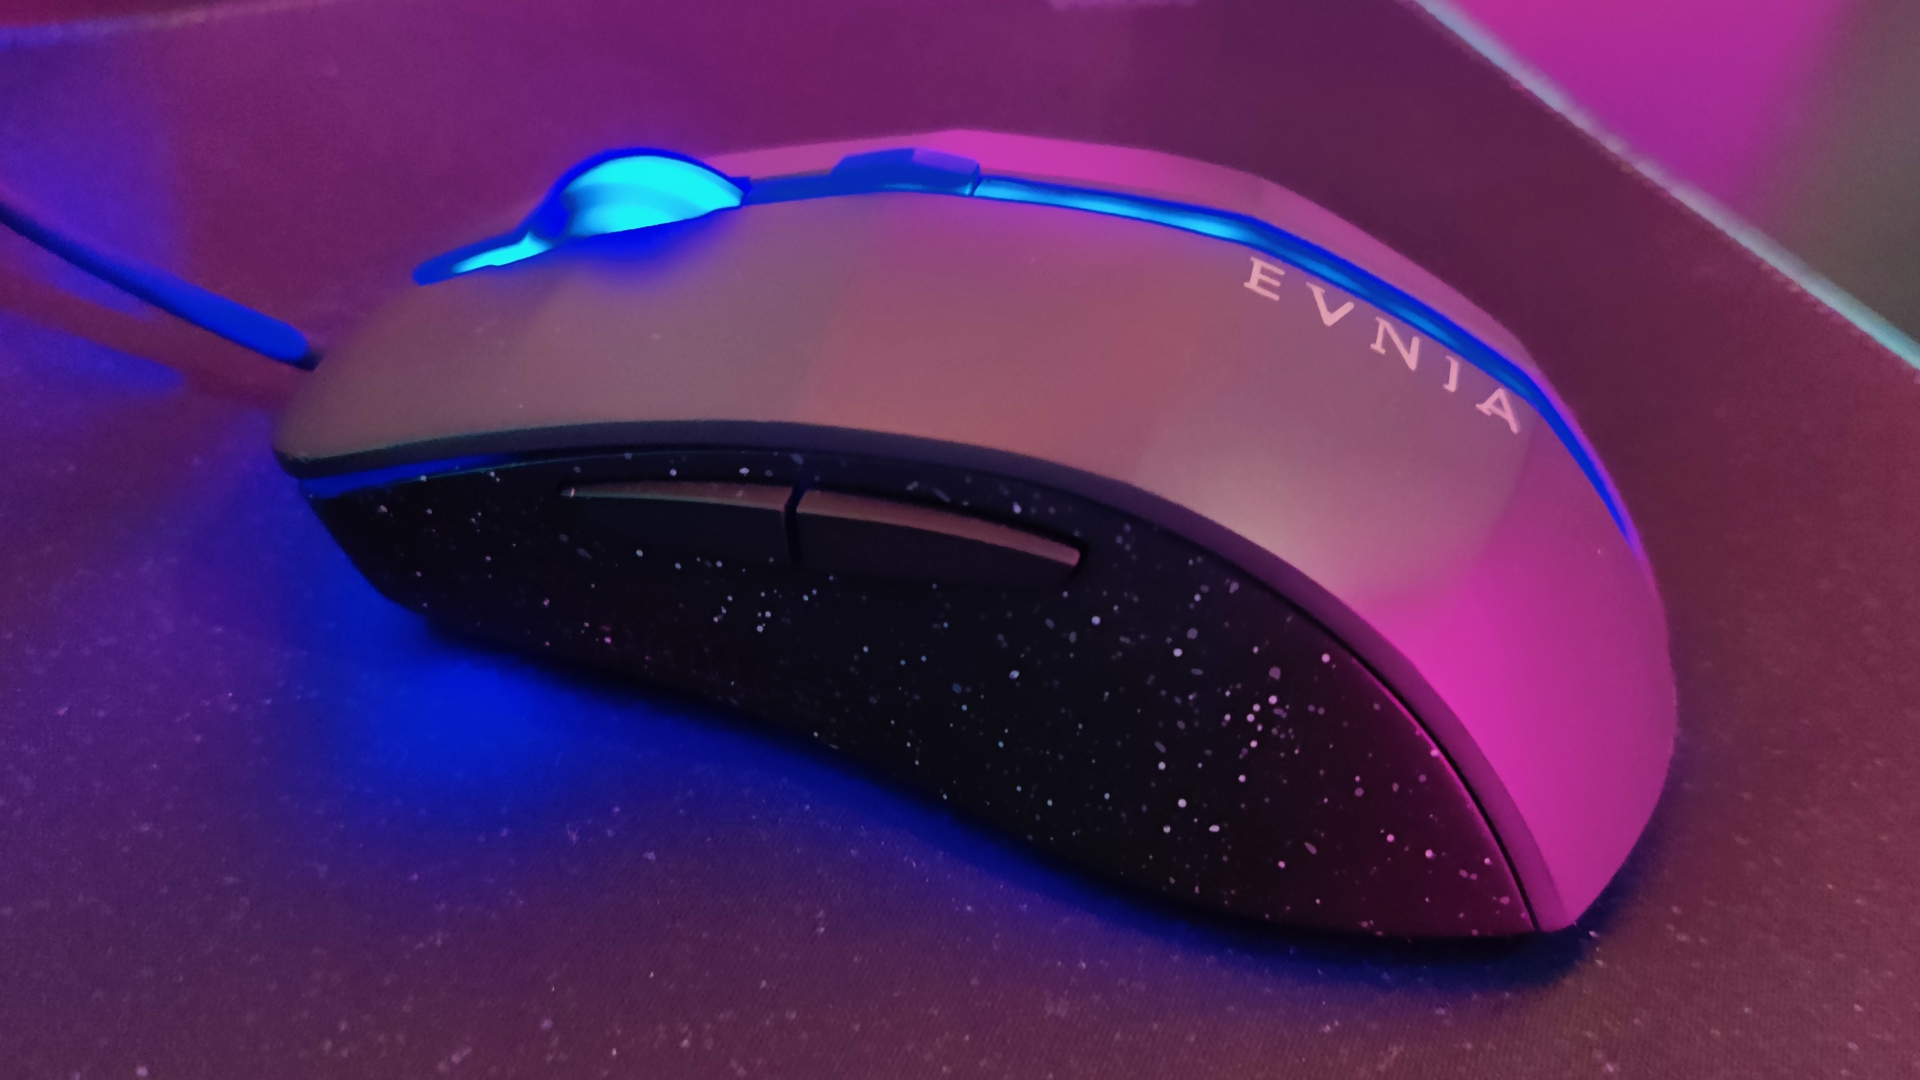 The Philips Evnia SPK9508 gaming mouse